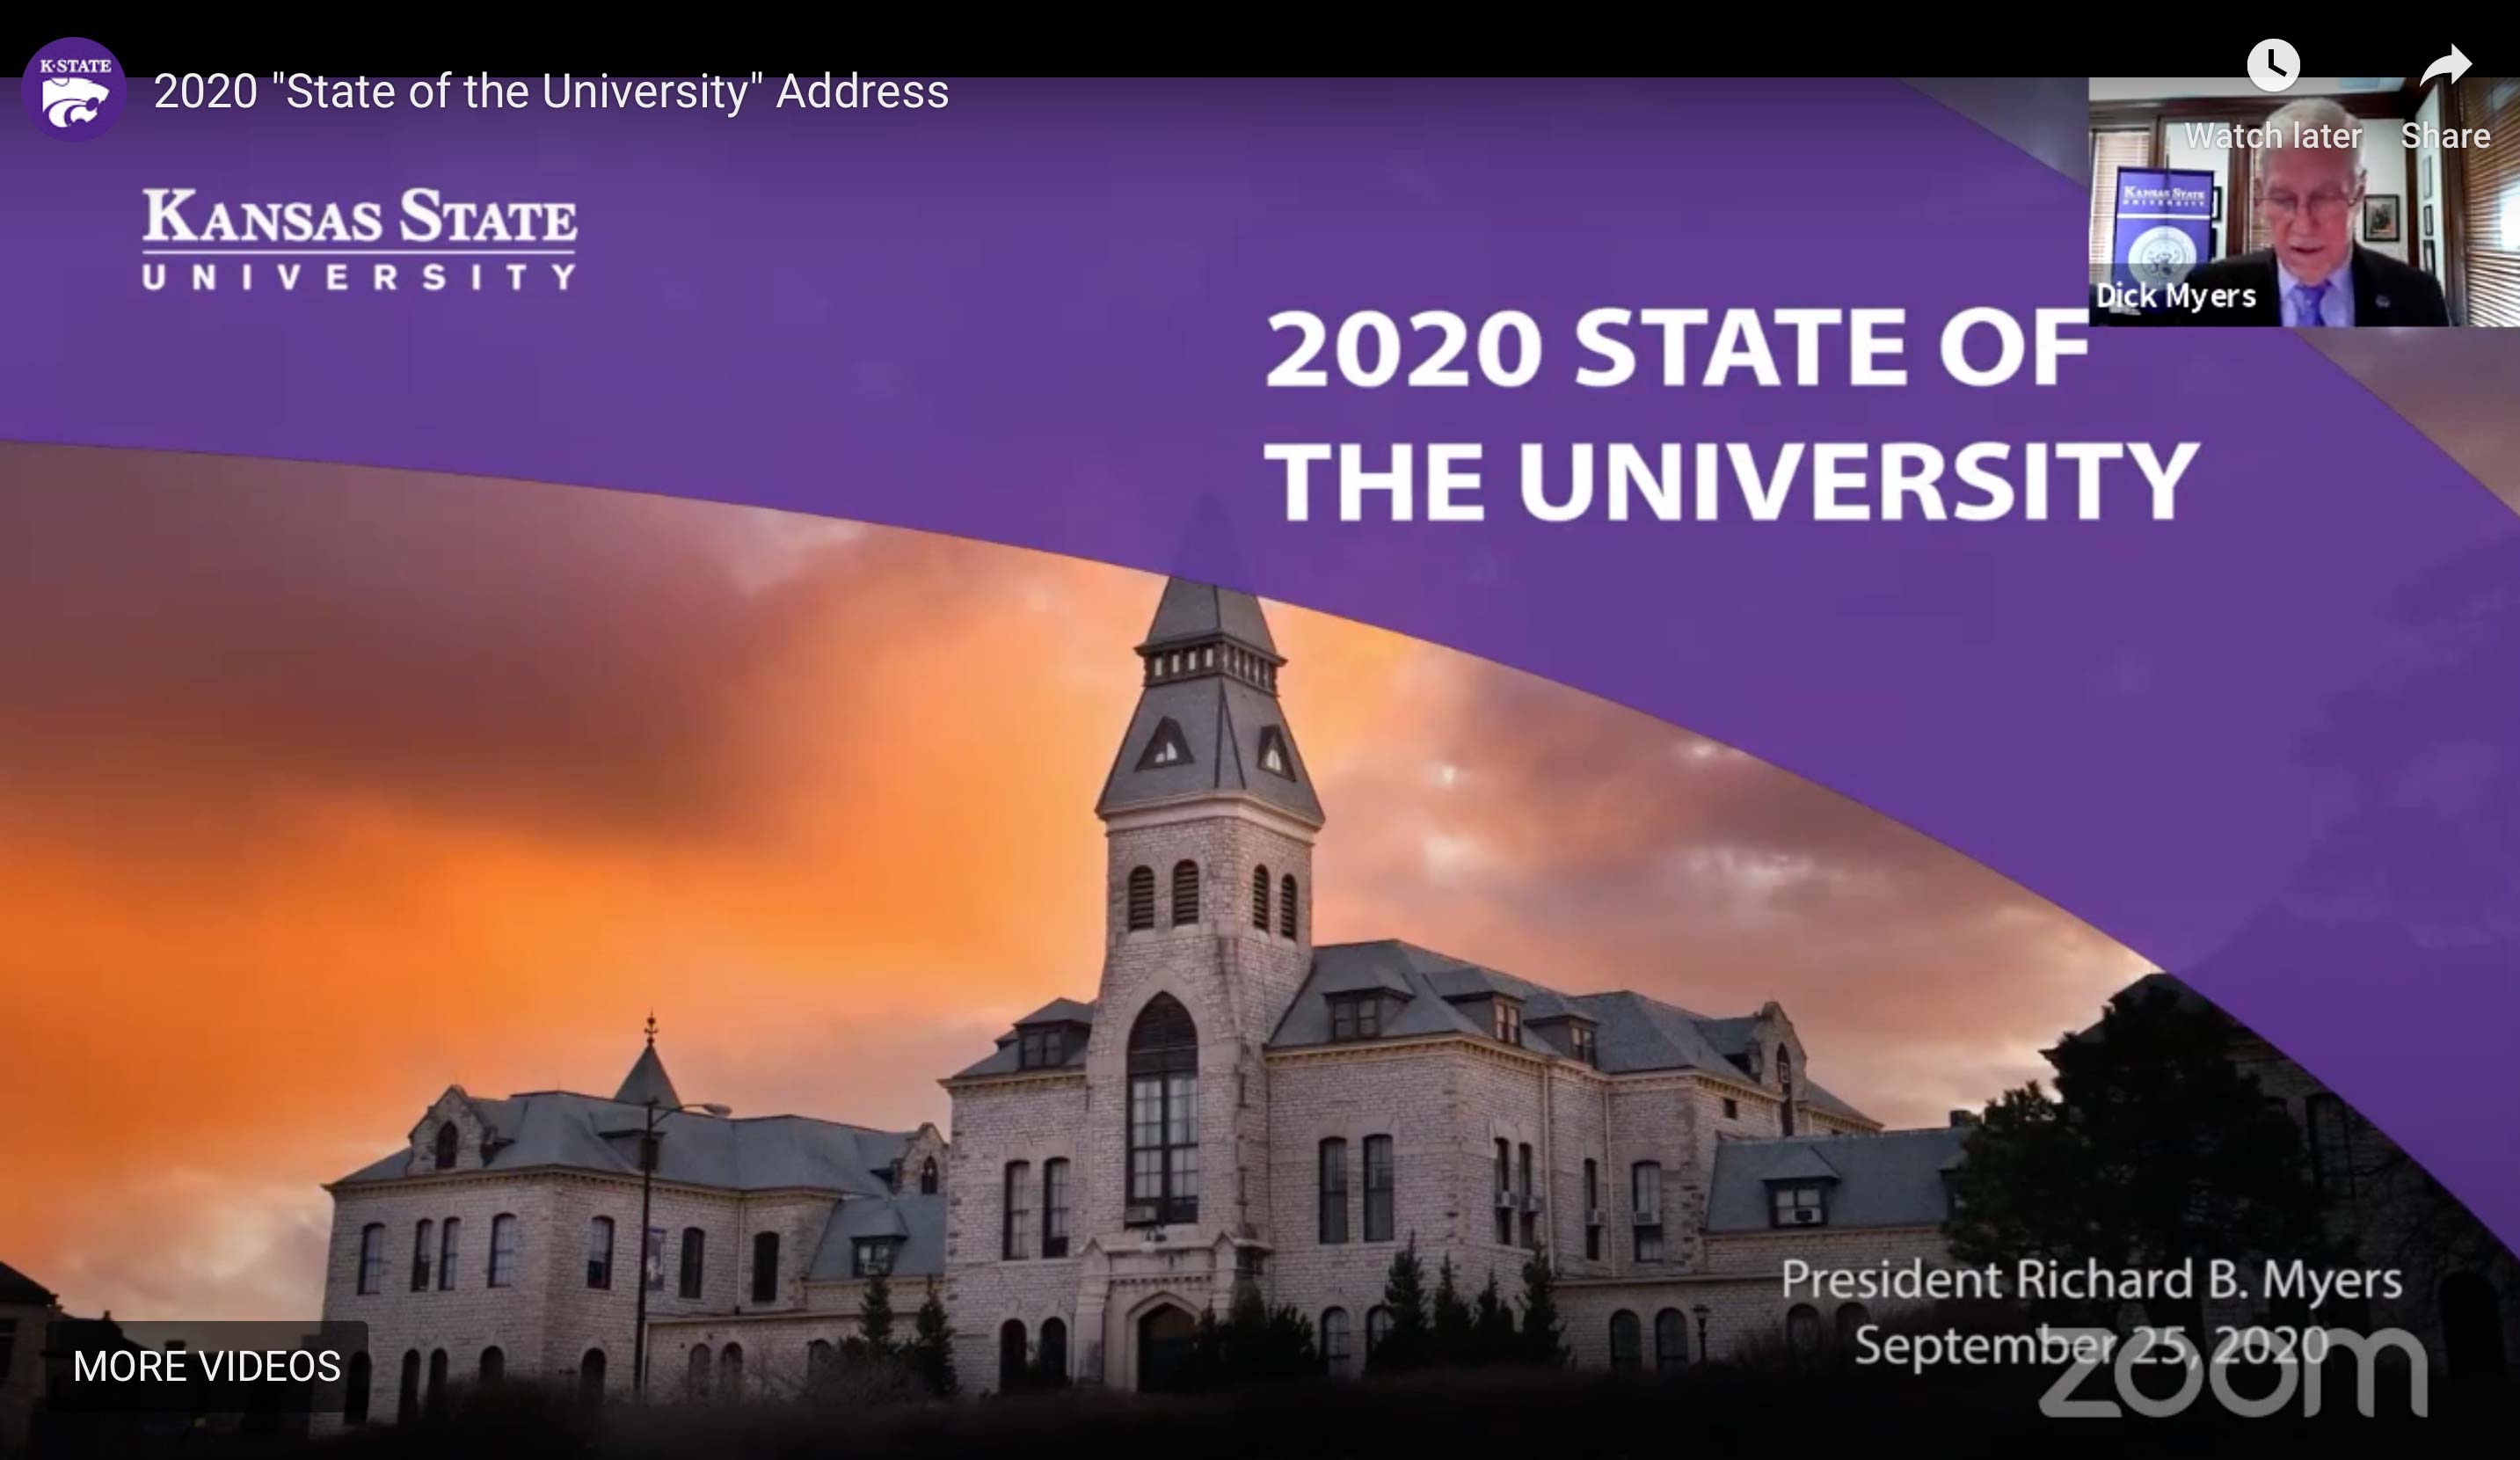 State of the University 2020 document icon